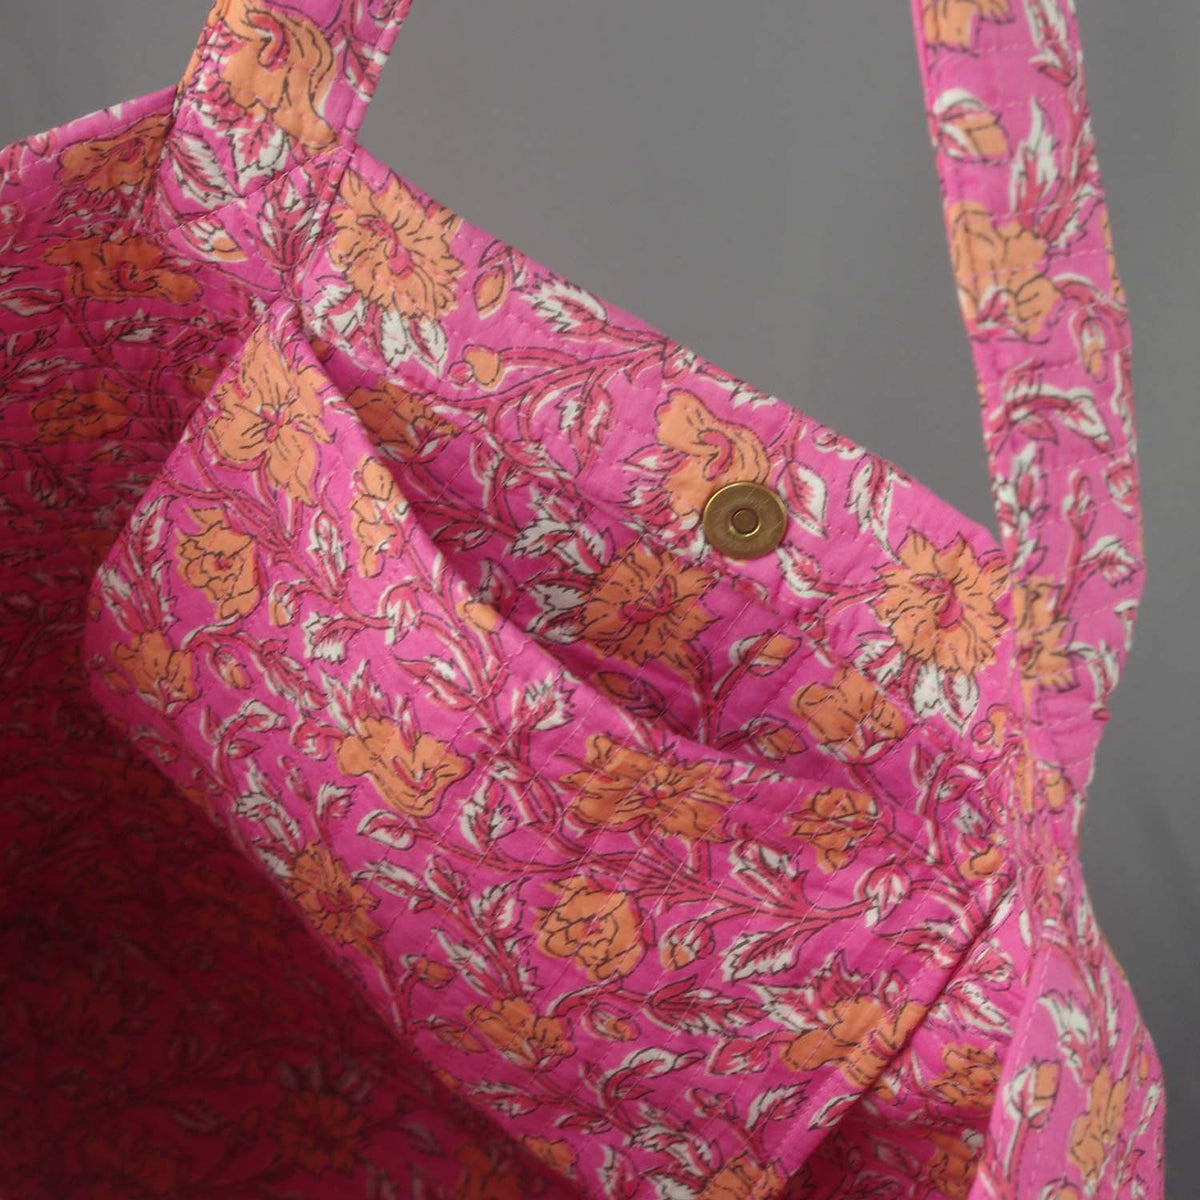 Cotton Quilted Large Shoppping / Beach Bag - Pink Orange Floral Print